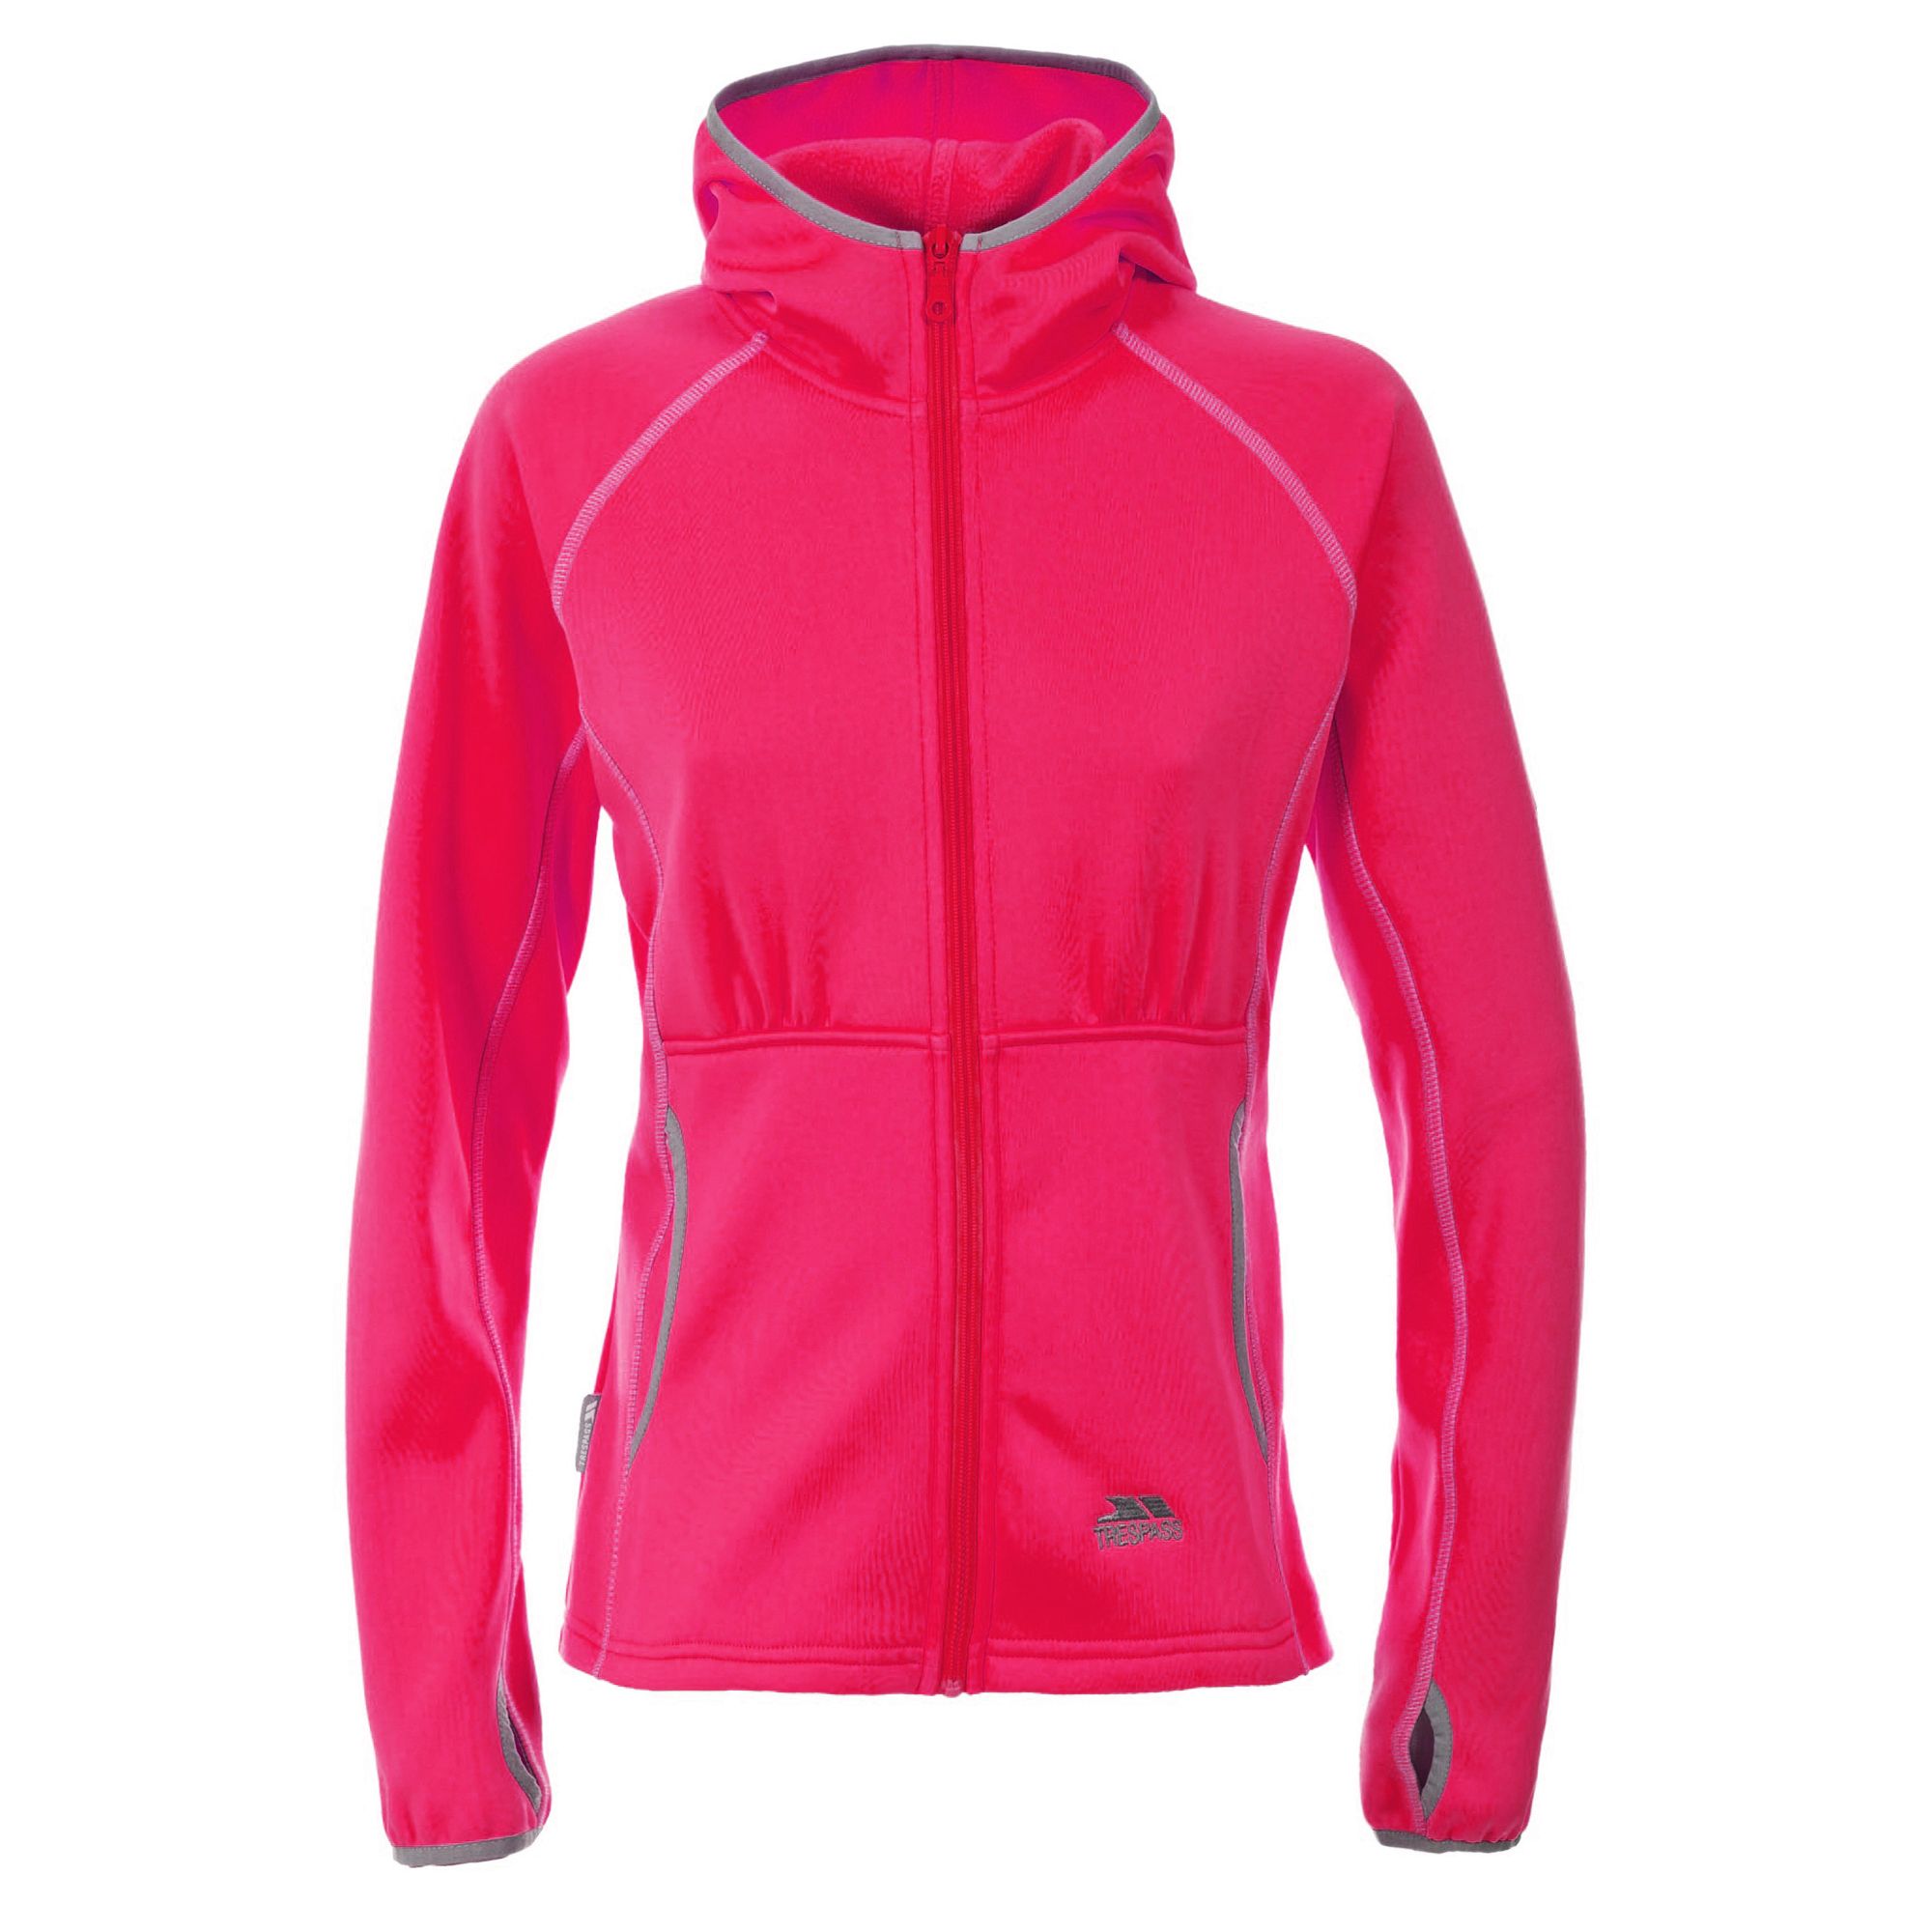 Womens full zip up fleece. Topside- interlock. Backside- brushed microfleece. Anti pilling. Hooded style. Contrast stretch bindings. Two pockets. Contrast cover stitch detail. Airtrap. 300gsm. Material: 100% Polyester. Trespass Womens Chest Sizing (approx): XS/8 - 32in/81cm, S/10 - 34in/86cm, M/12 - 36in/91.4cm, L/14 - 38in/96.5cm, XL/16 - 40in/101.5cm, XXL/18 - 42in/106.5cm.